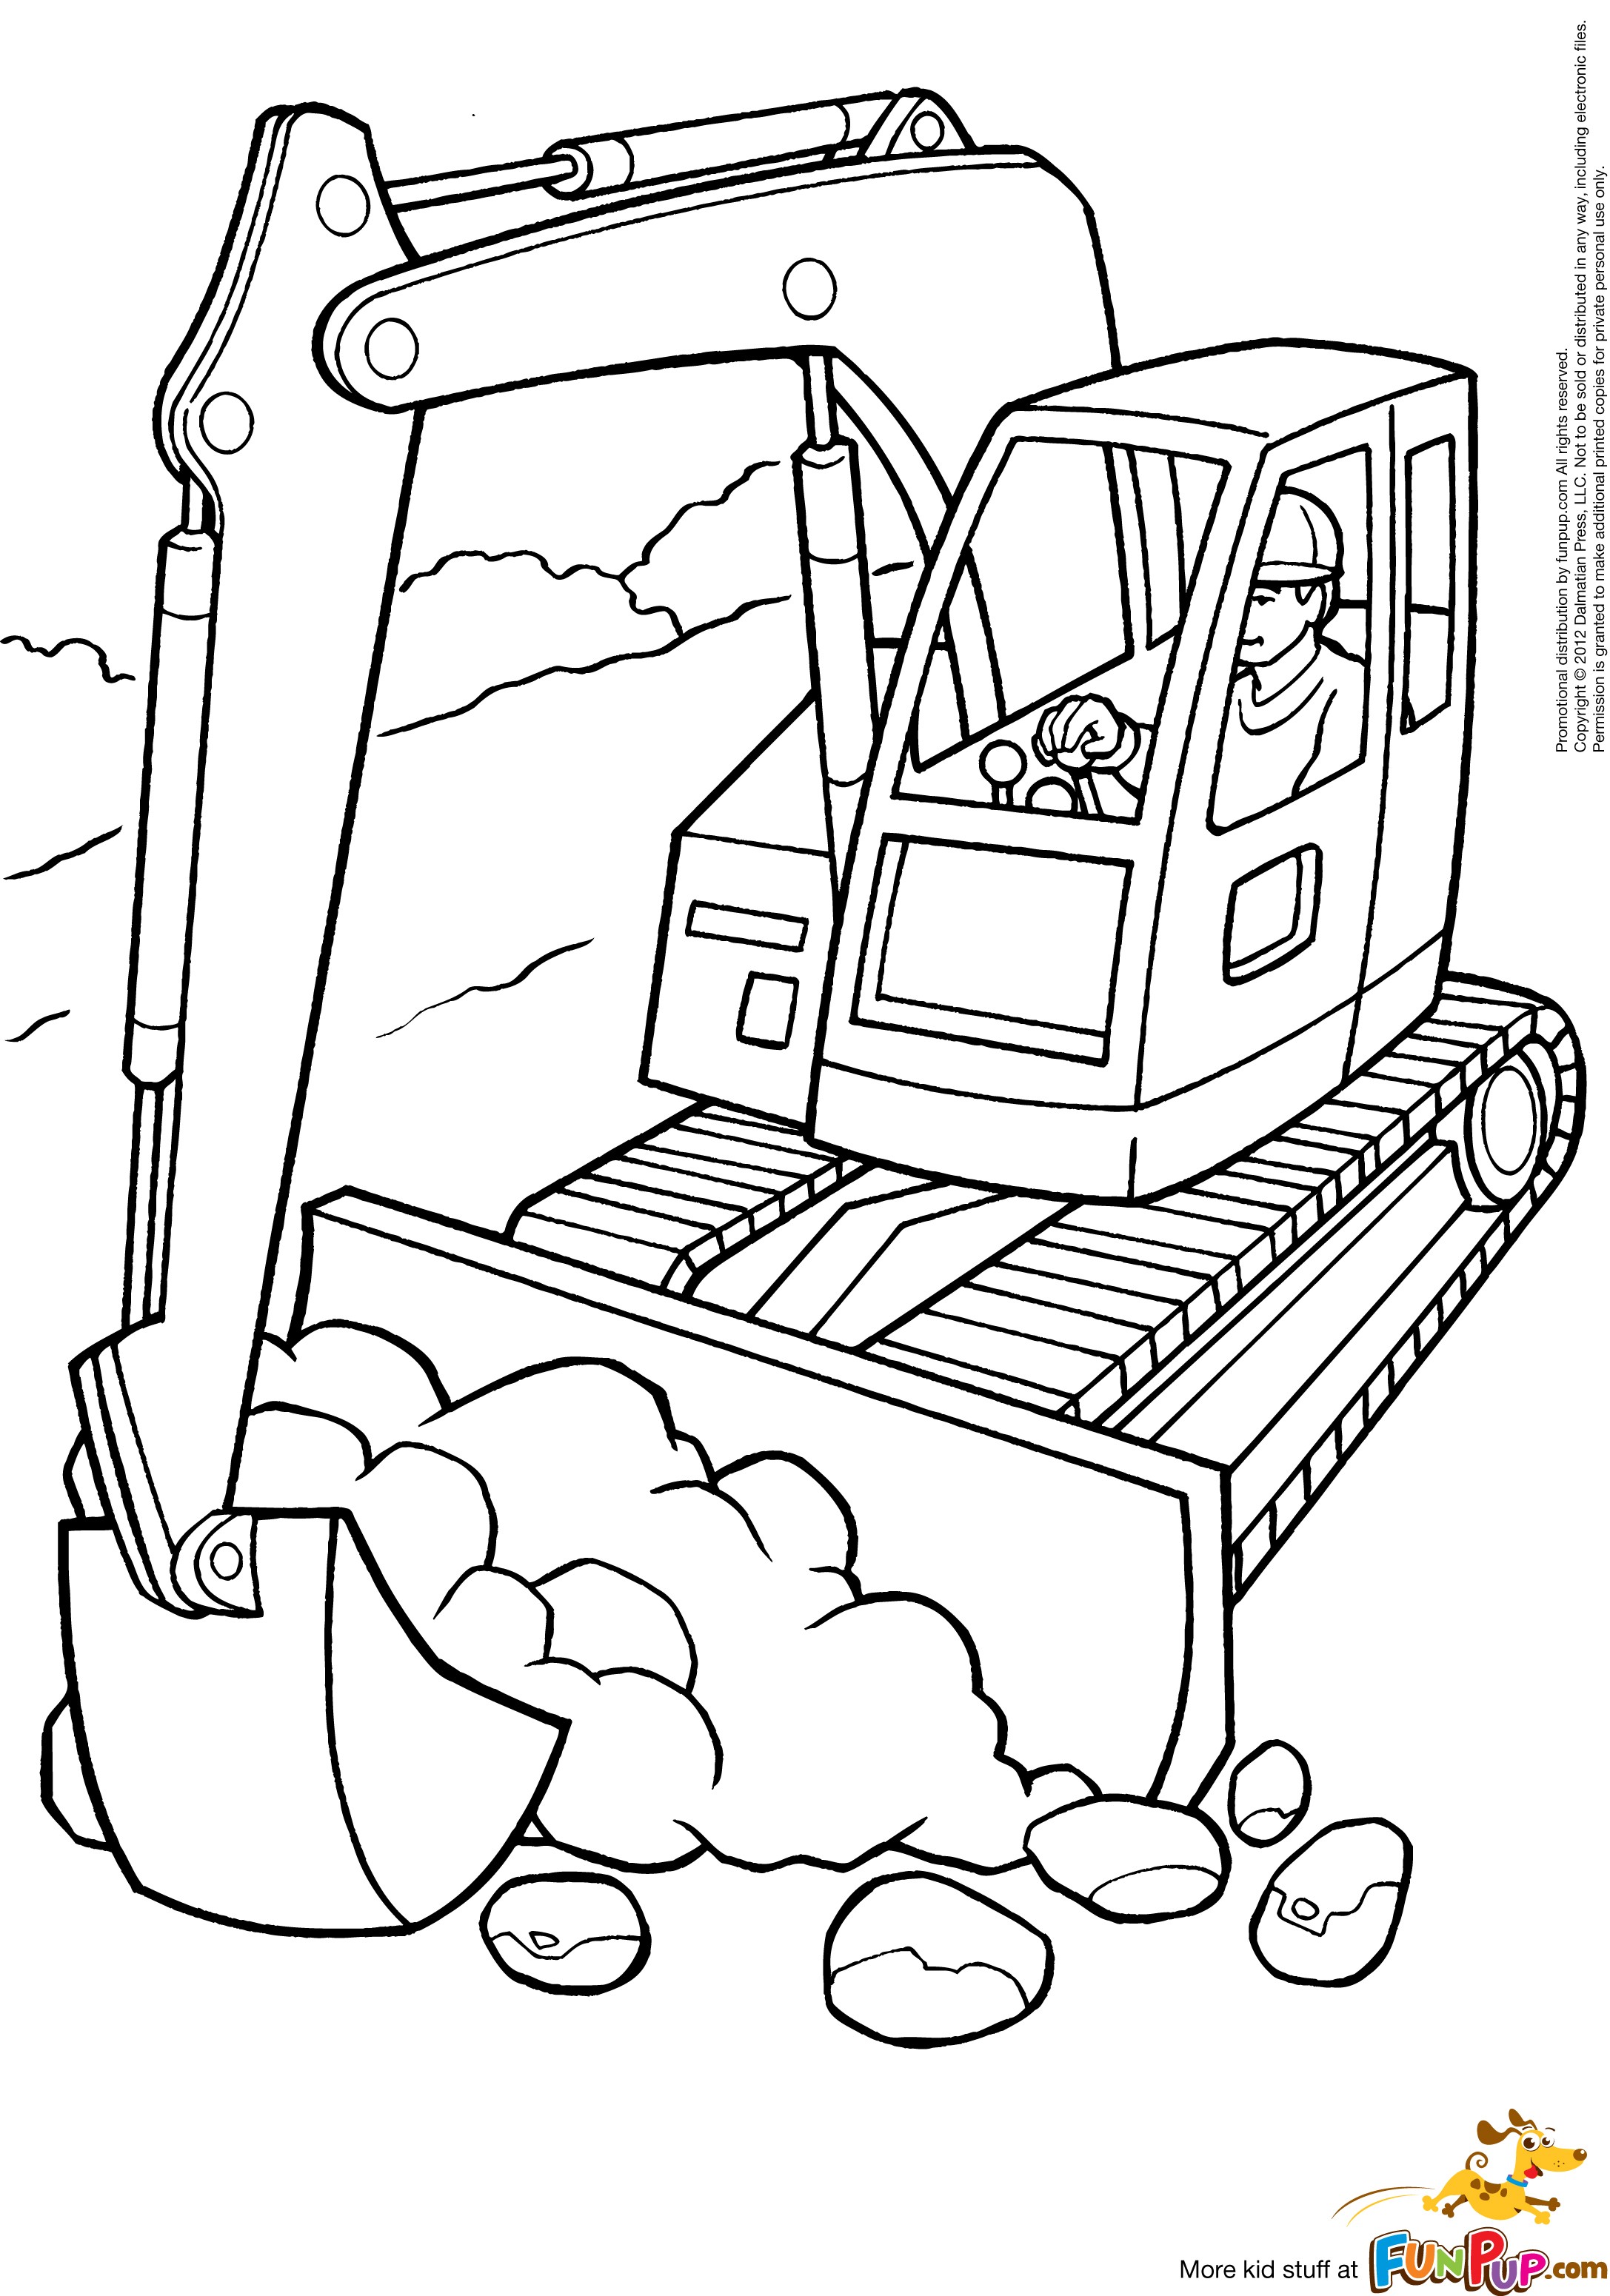 Coloring page: Bulldozer / Mecanic Shovel (Transportation) #141776 - Free Printable Coloring Pages